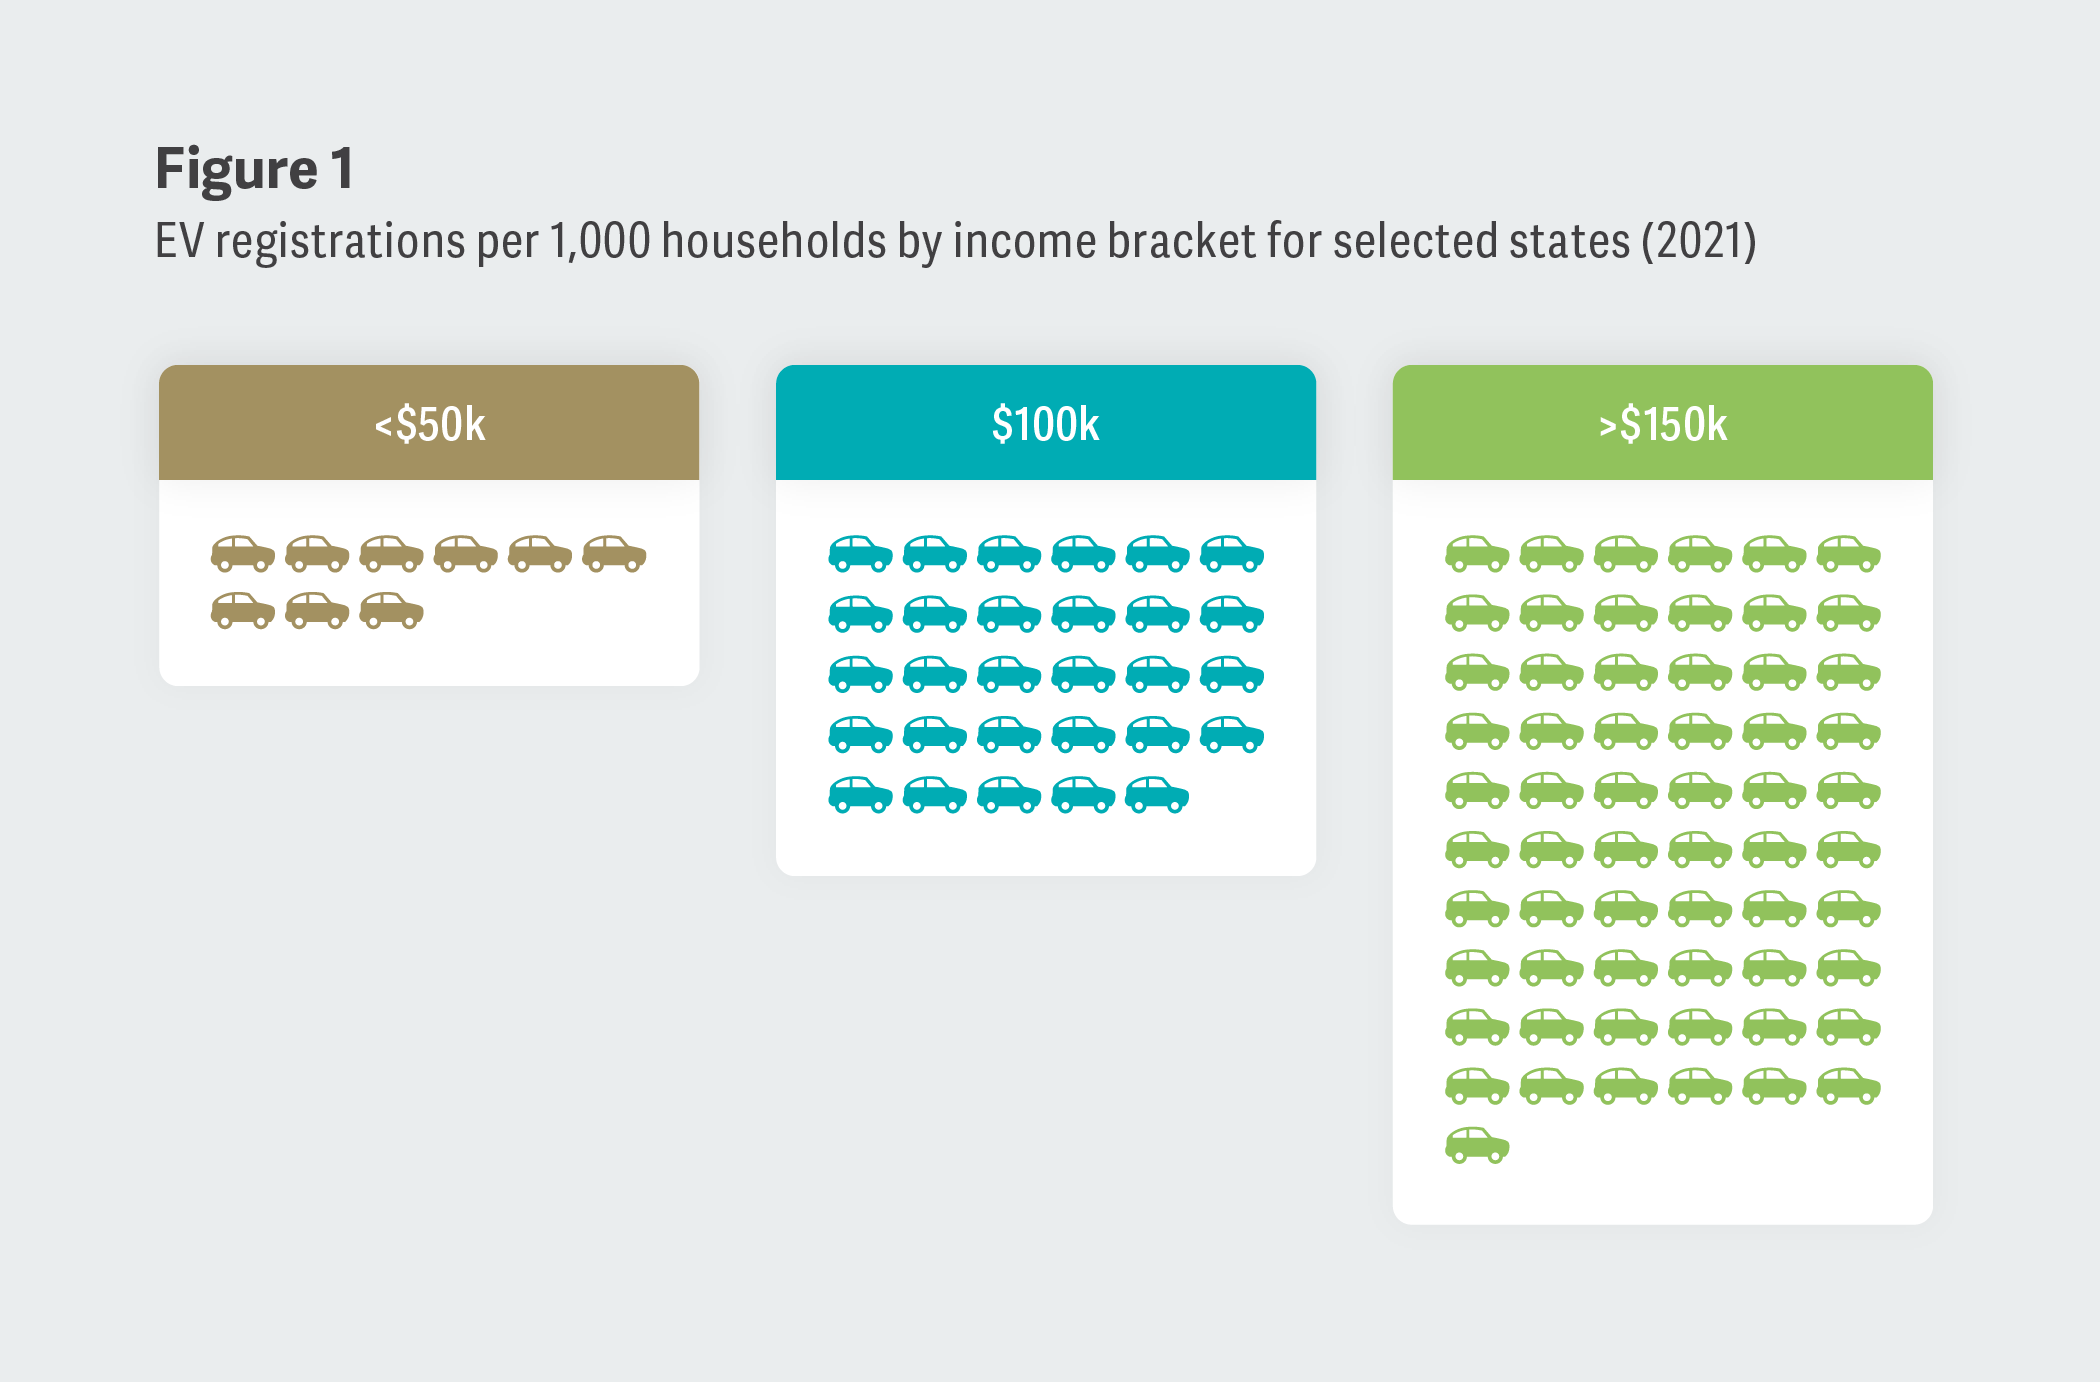 Figure 1: EV registrations per 1,000 households by income bracket for selected states (2021)